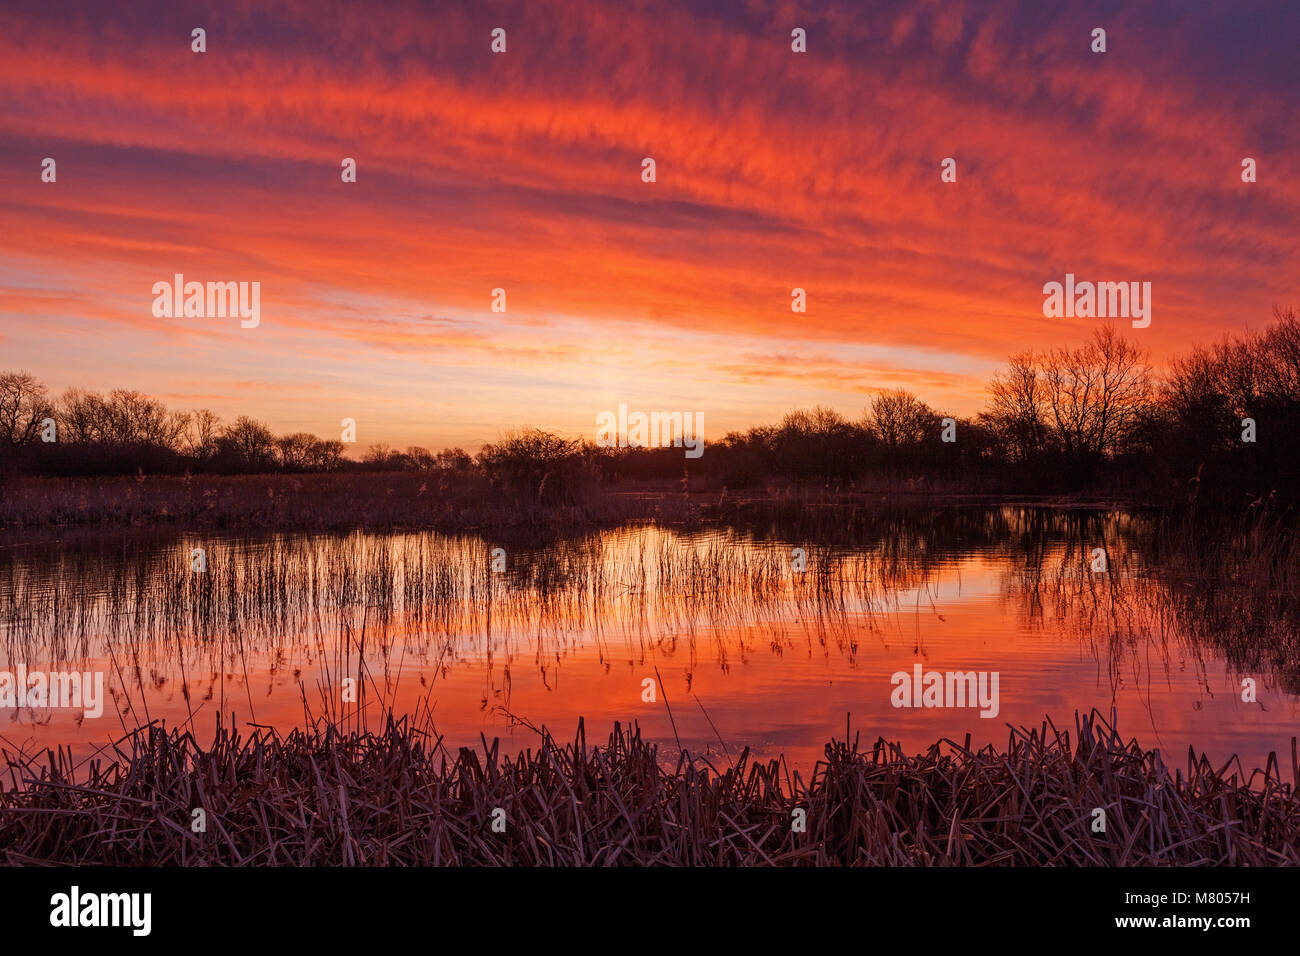 Barton-upon-Humber, North Lincolnshire. 14th Mar, 2018. UK Weather: A beautiful sunrise over a Lincolnshire Wildlife Trust Nature Reserve at Barton-upon-Humber, North Lincolnshire, UK. 14th March 2018. Credit: LEE BEEL/Alamy Live News Stock Photo